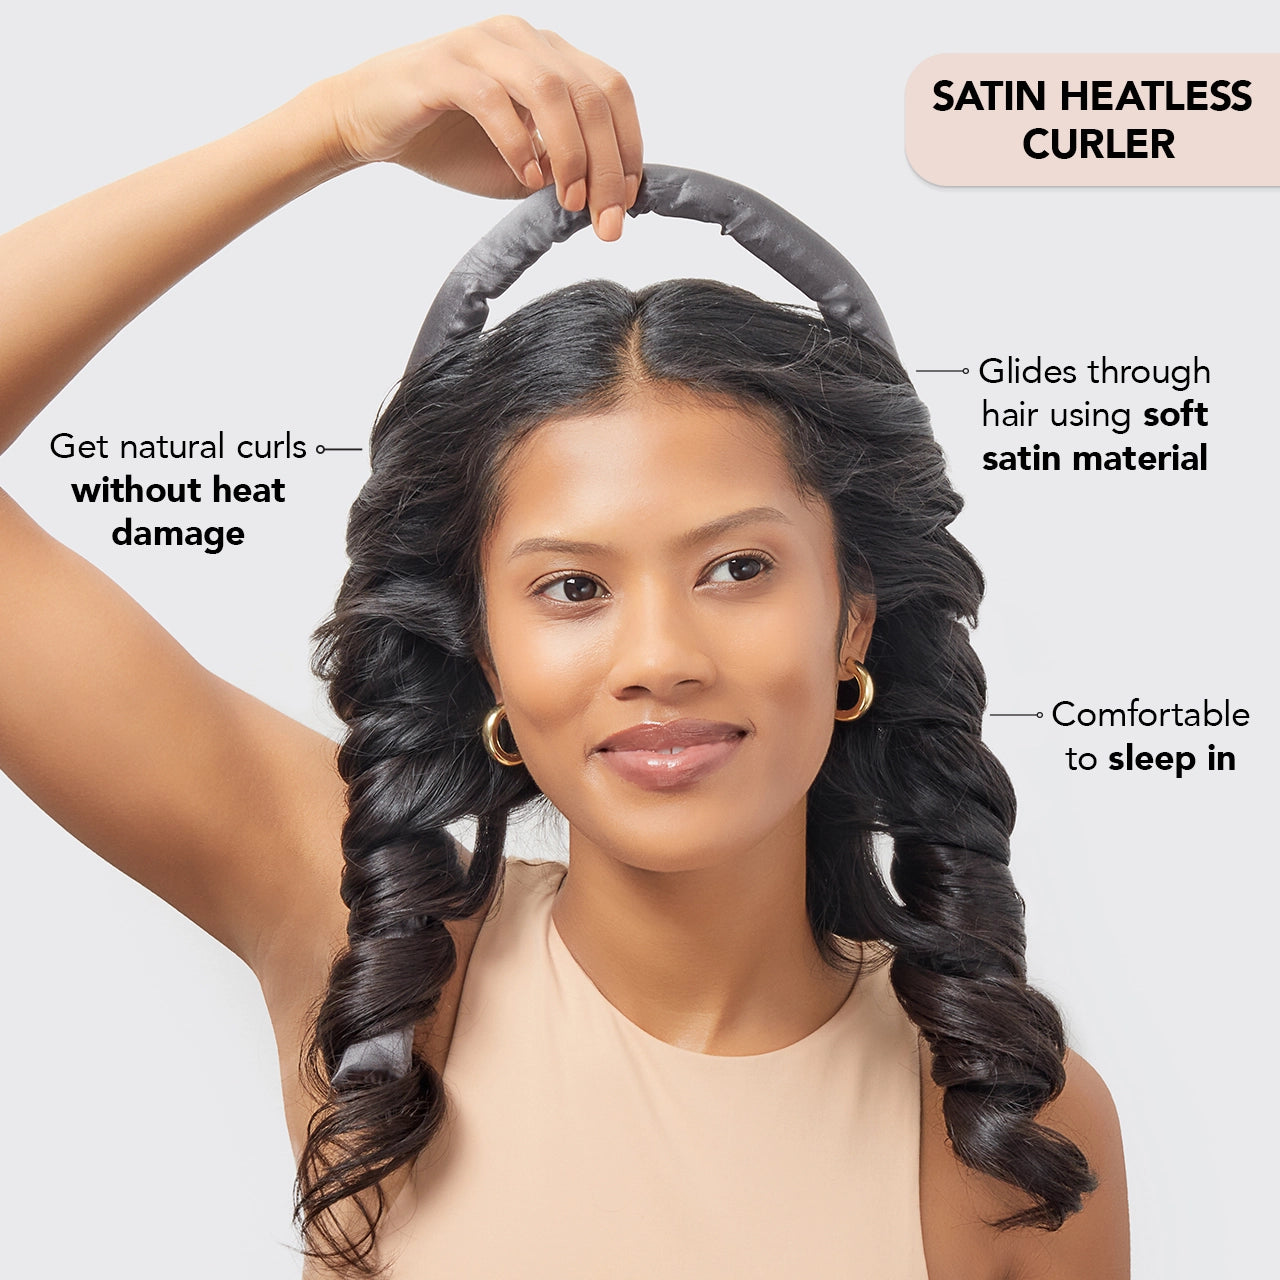 Charcoal Satin Heatless Curling Set by Kitsch